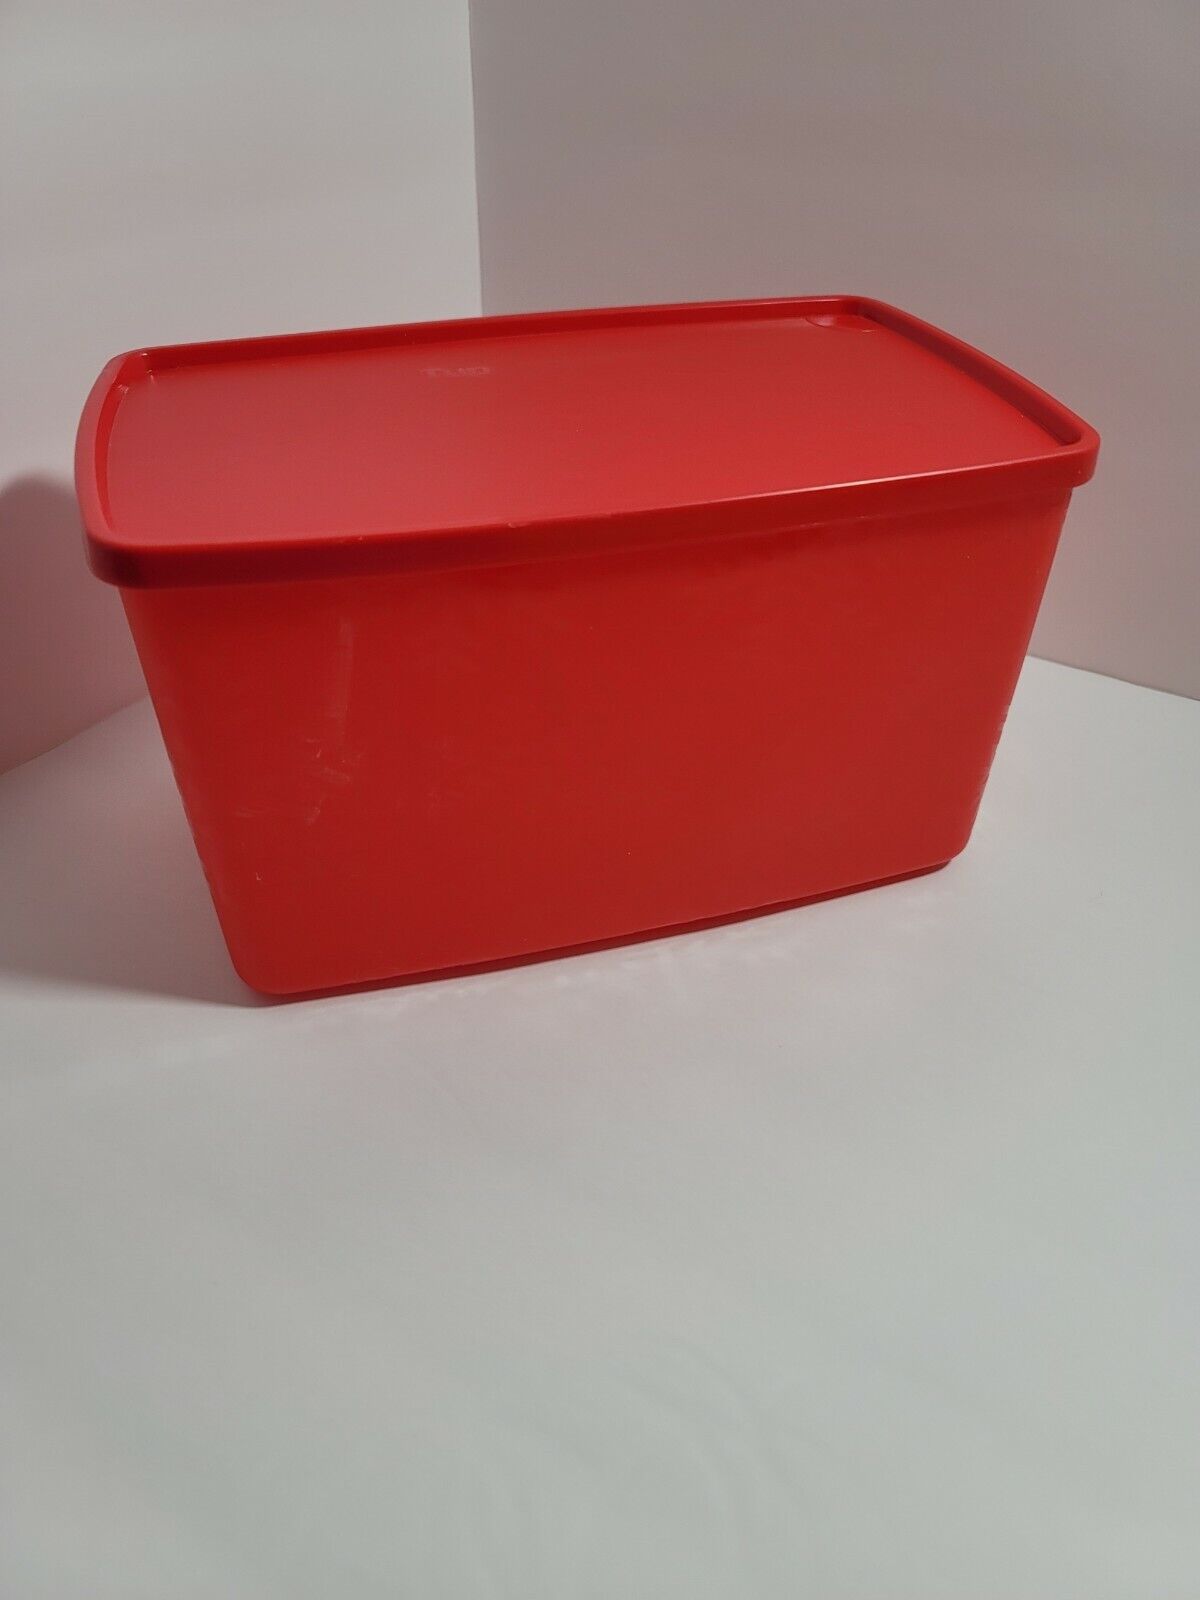 New TUPPERWARE Freeze It Mate MEDIUM DEEP CONTAINER 11 Cup FREE US SHIP Red